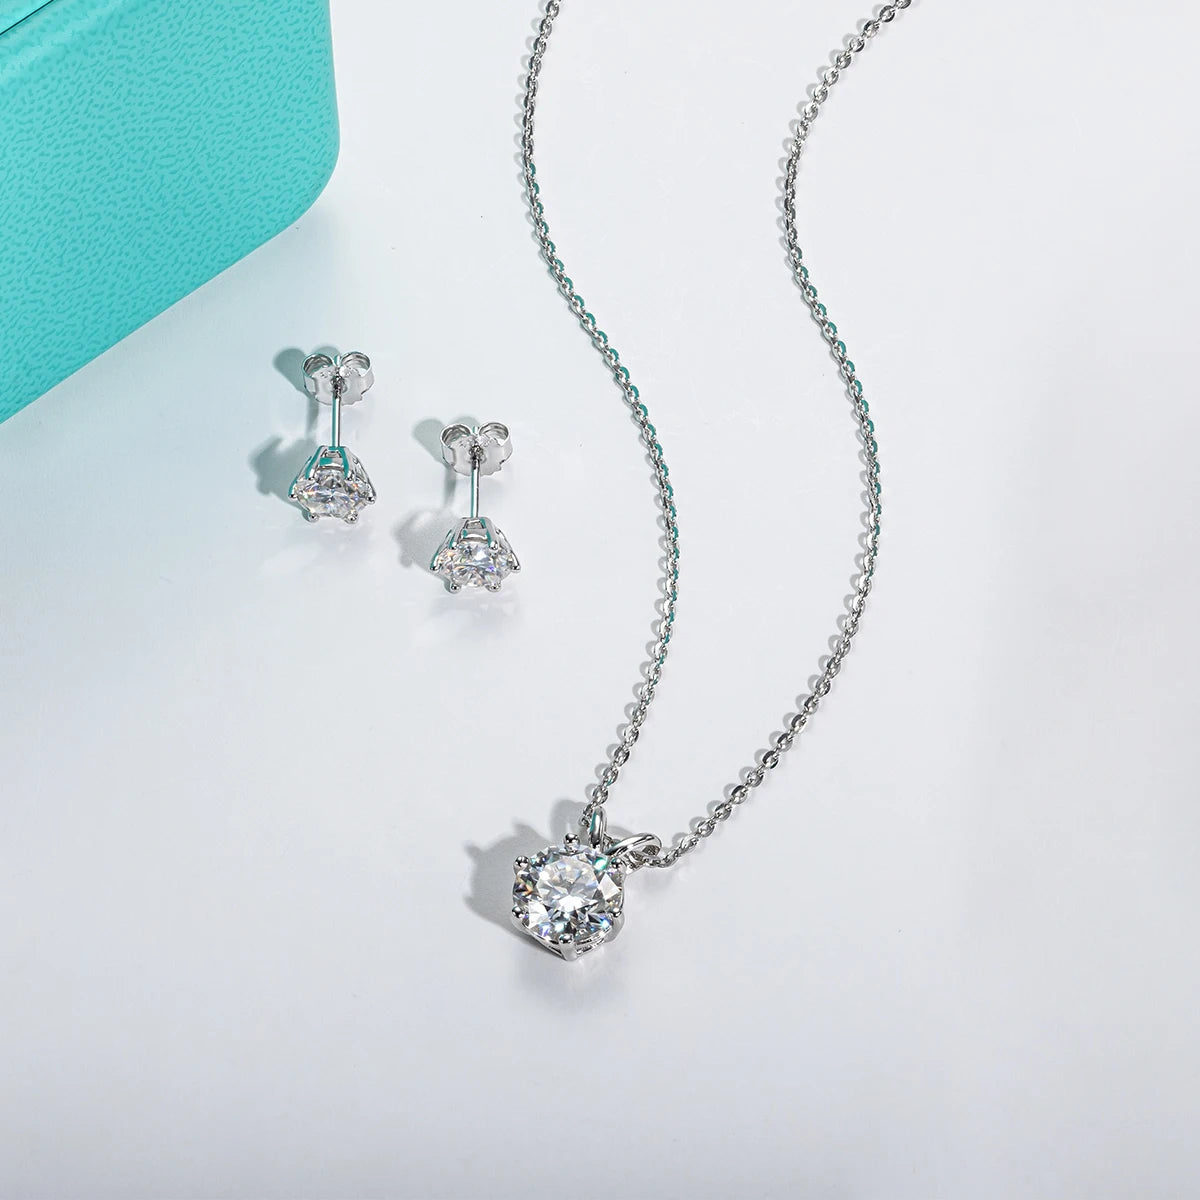 Moissanite Jewelry Sets. Necklace 3.0 Carat. Earrings 2.0 Carat.